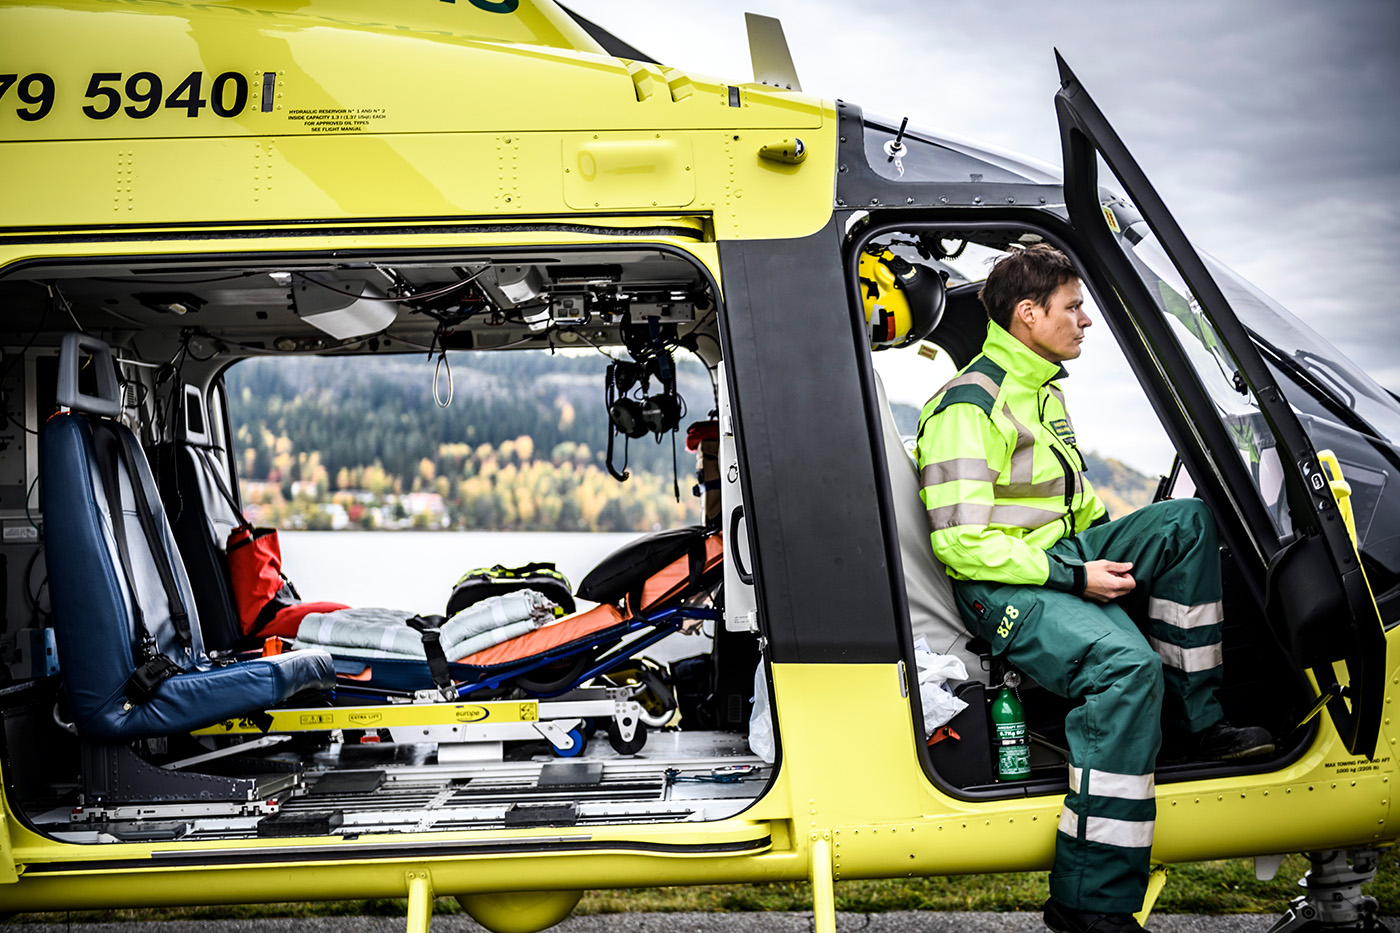 Ortivus team ambulance helicopter equipped with MobiMed